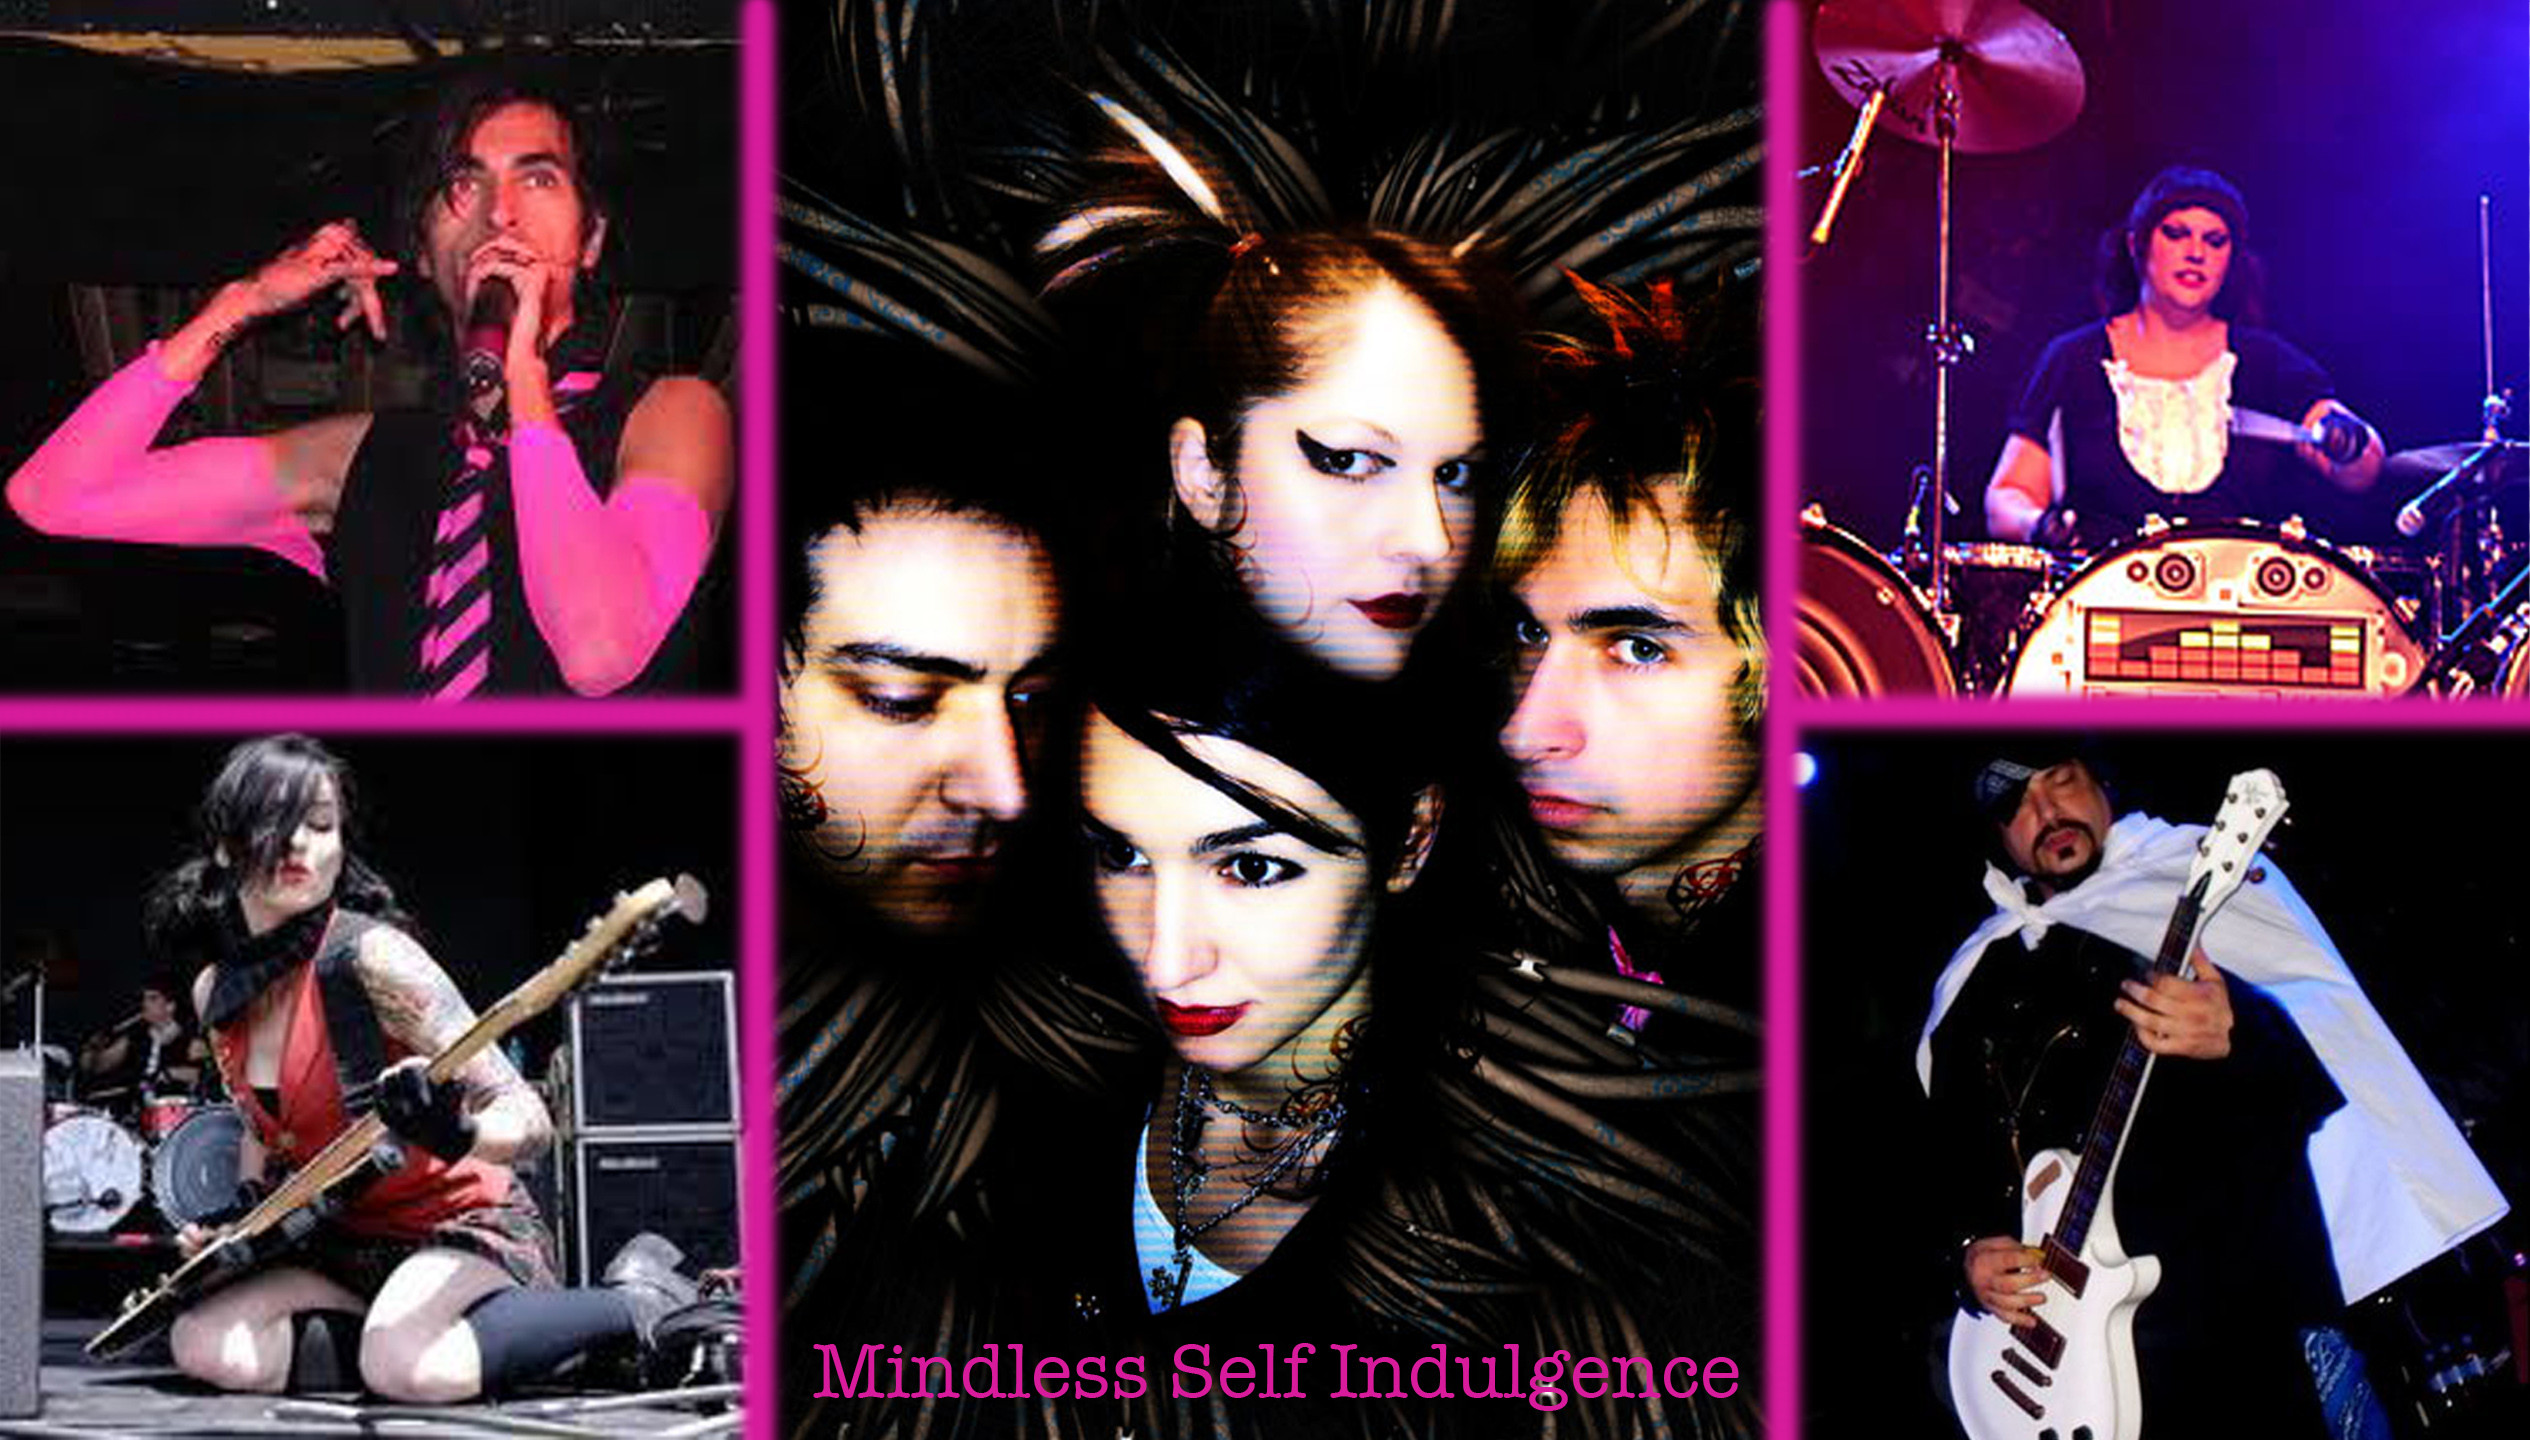 2530x1440 KatyChemical 2 6 Mindless Self Indulgence wallpaper by clicheclad